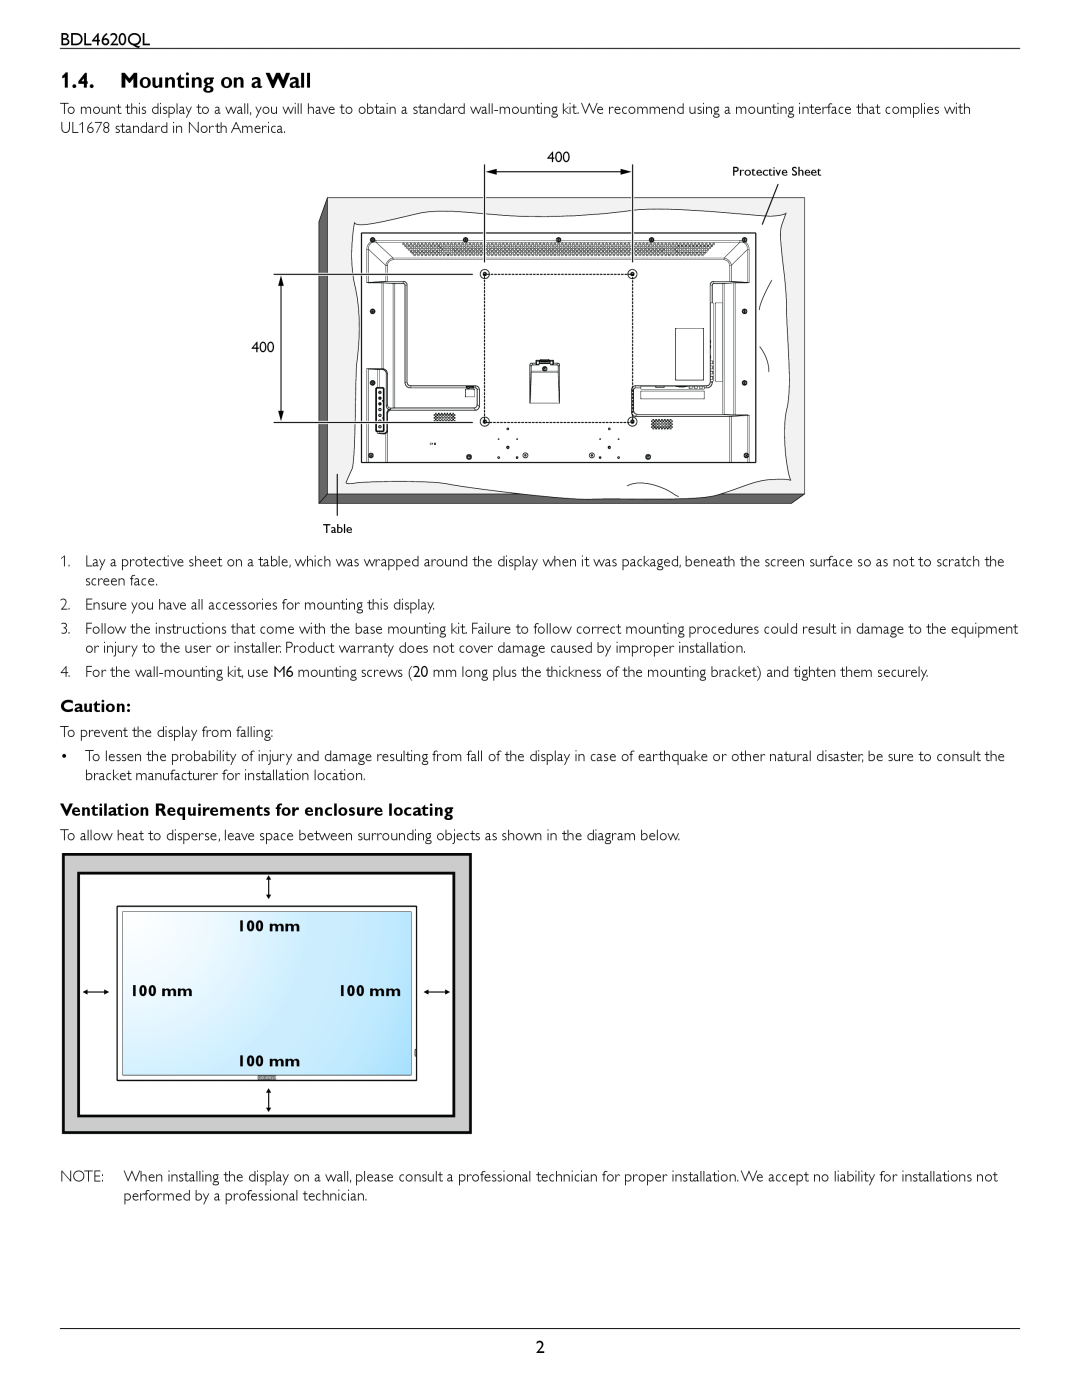 Philips BDL4620QL user manual Mounting on a Wall, Ventilation Requirements for enclosure locating, 100 mm 